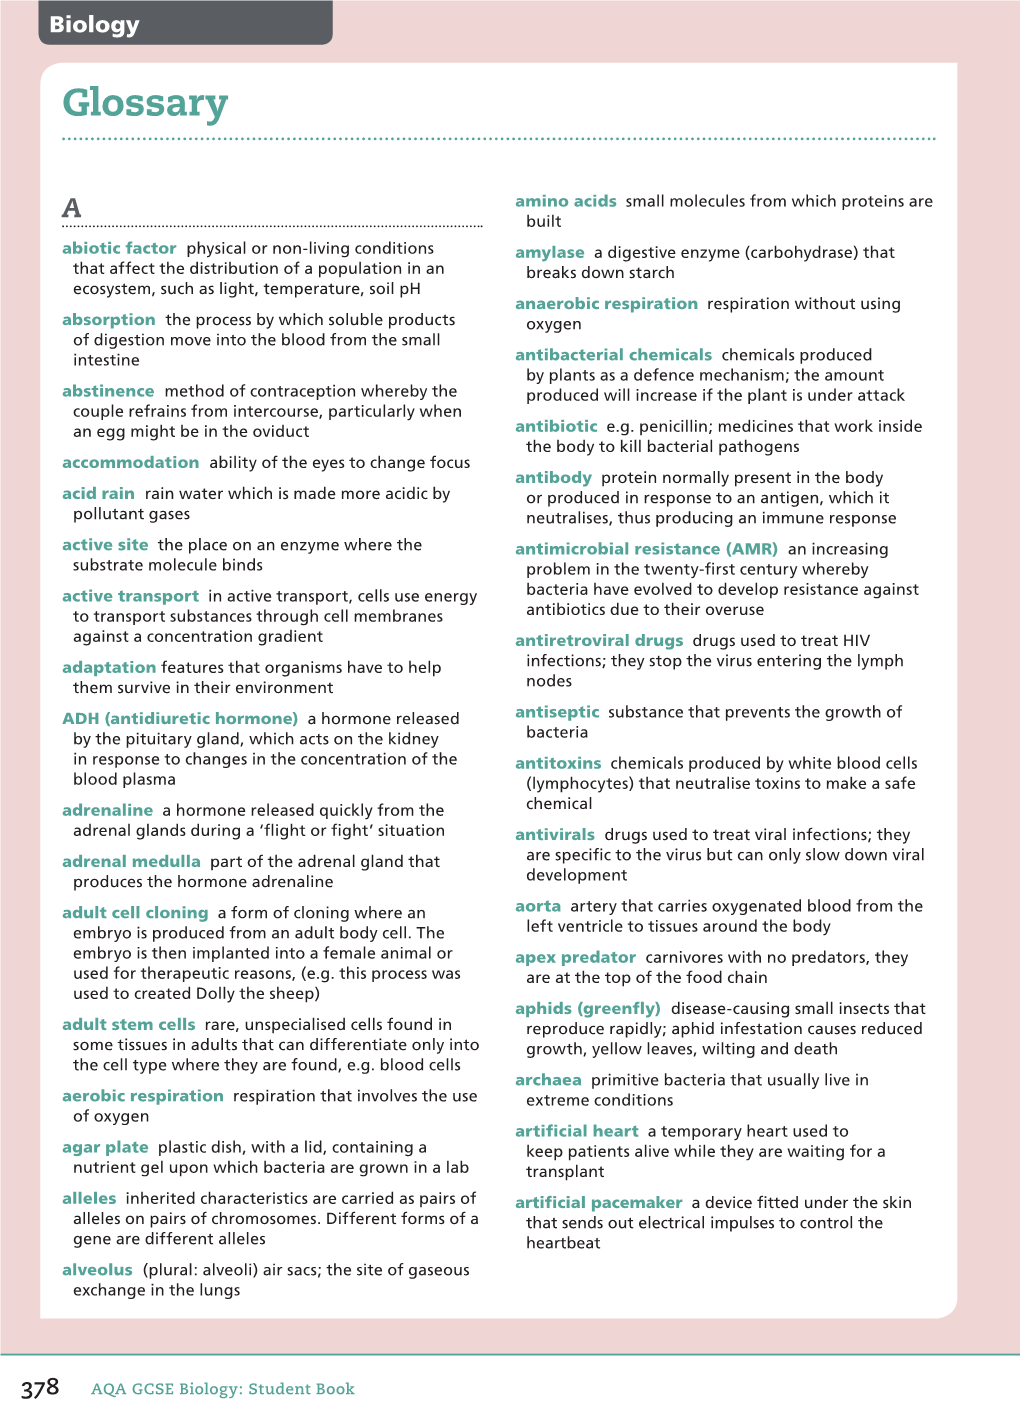 Revised Glossary for AQA GCSE Biology Student Book